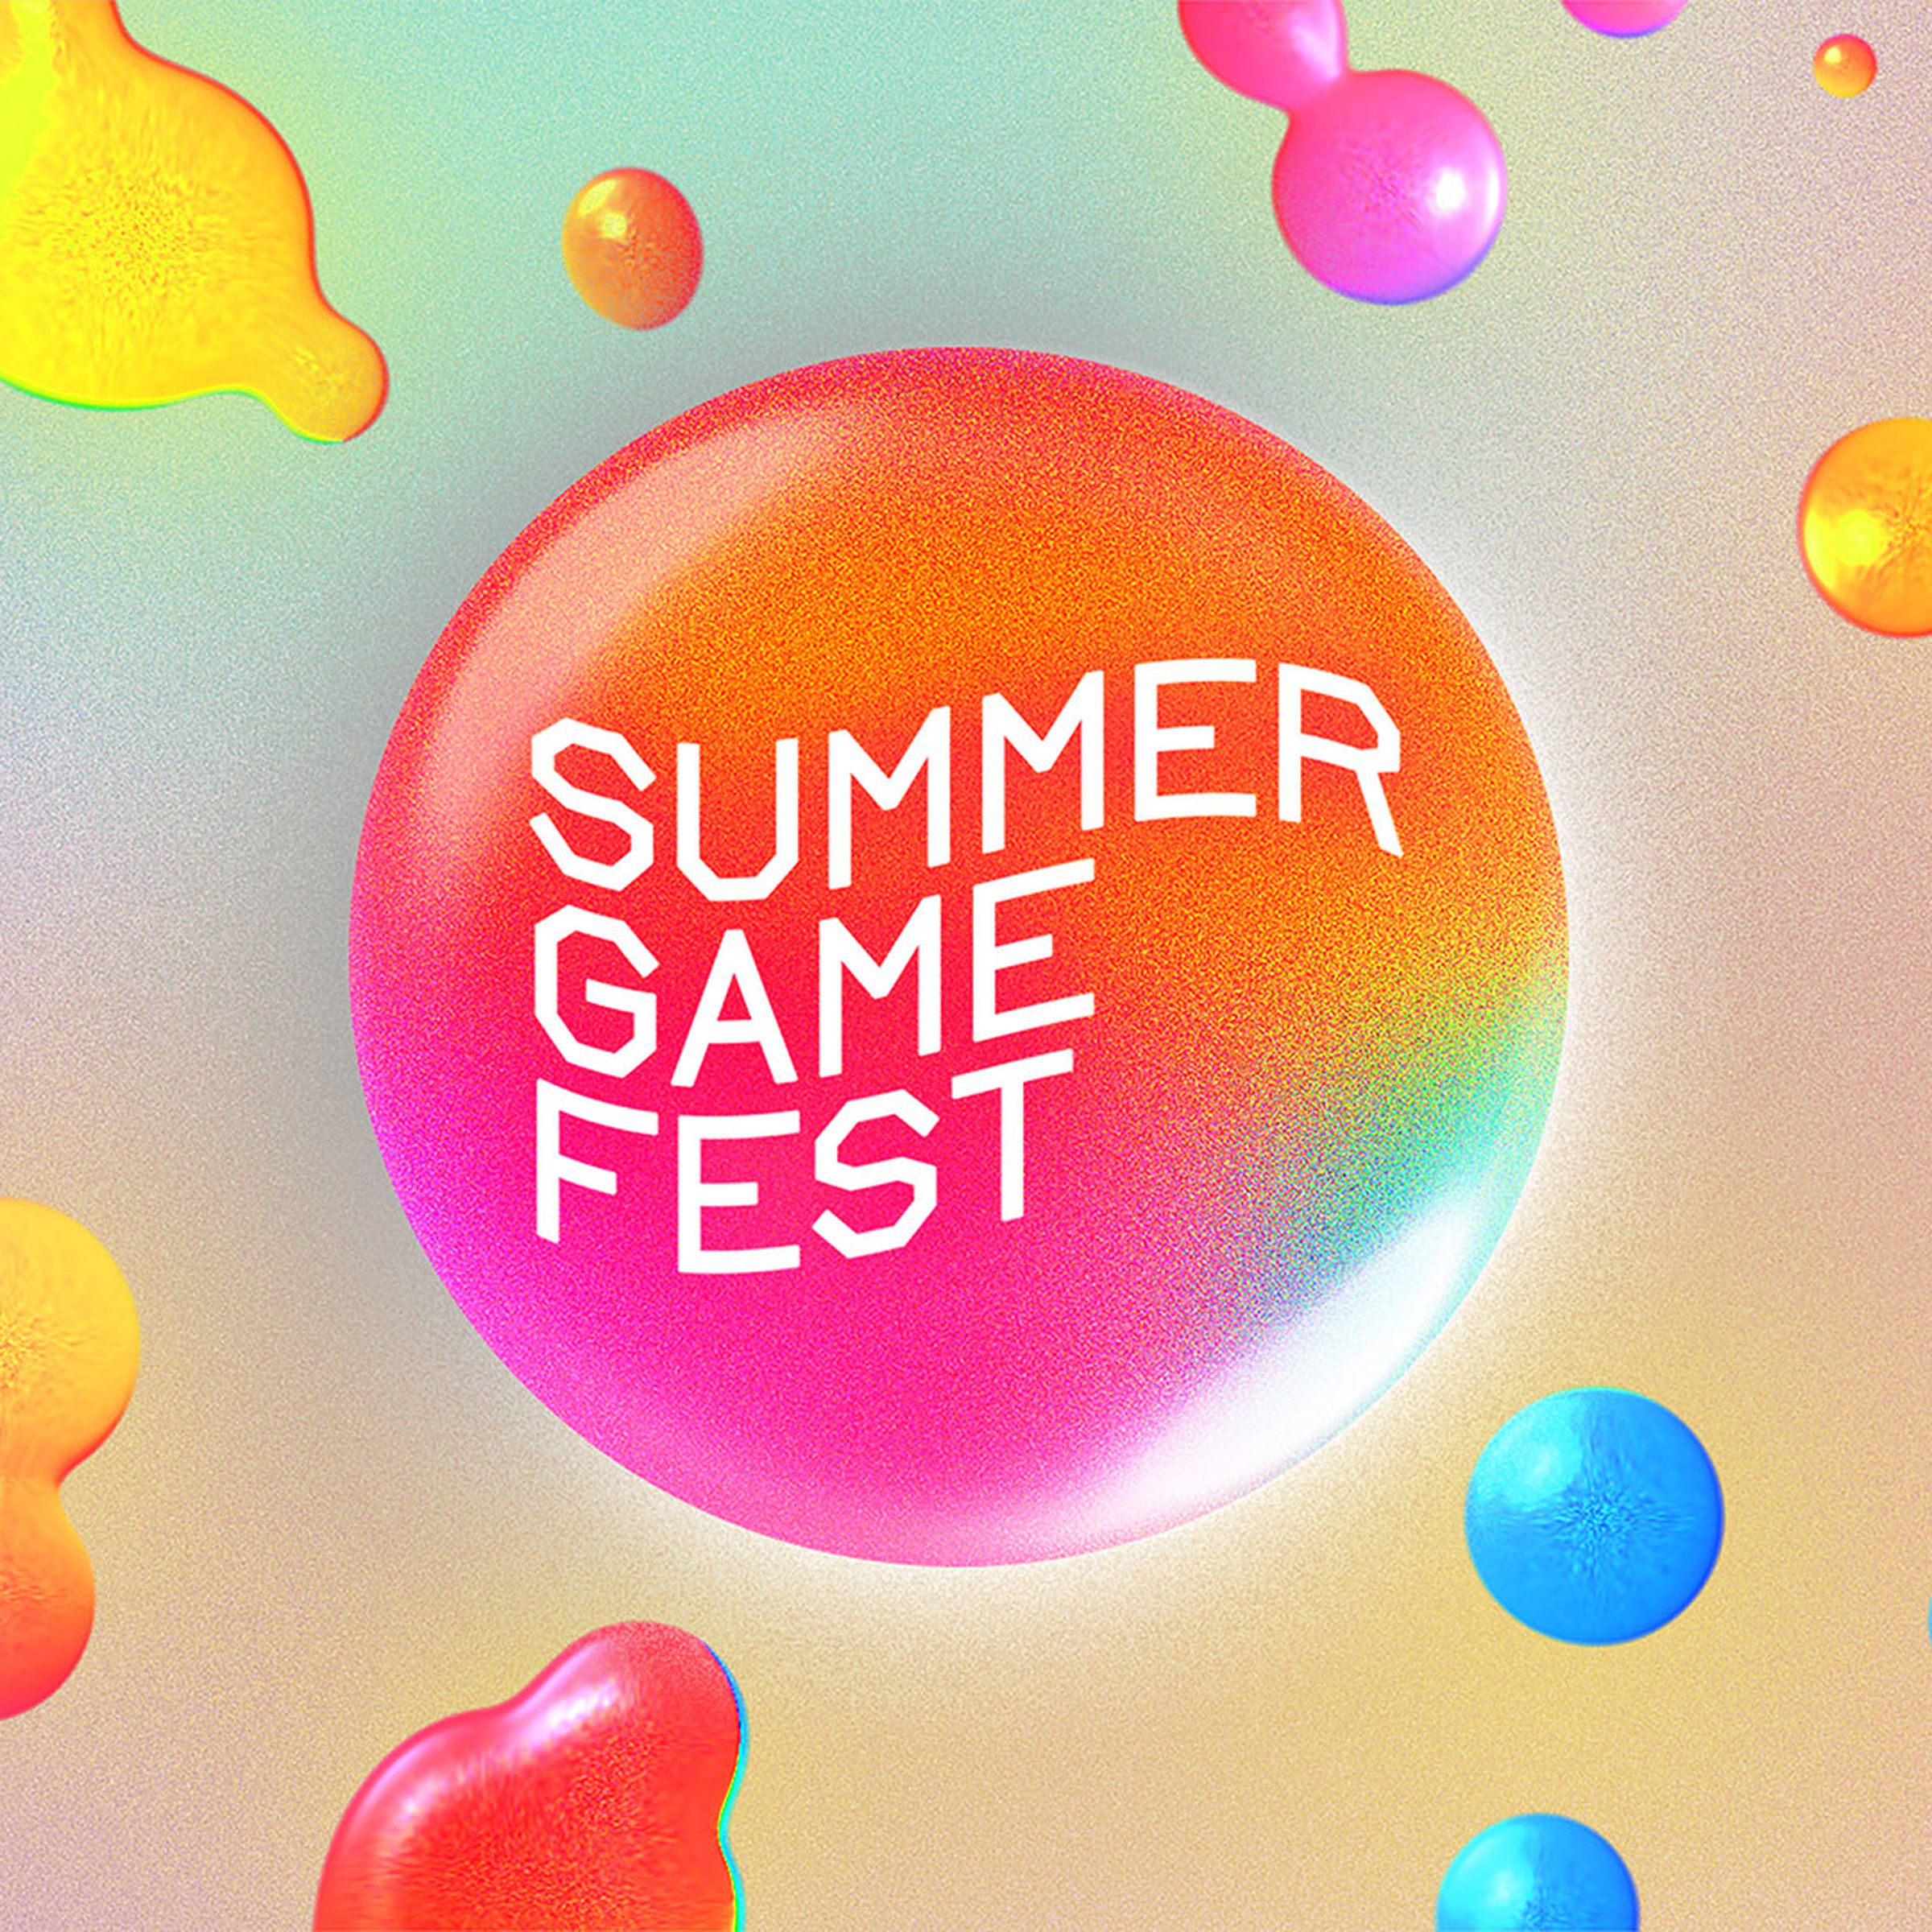 An image showing the Summer Game Fest logo